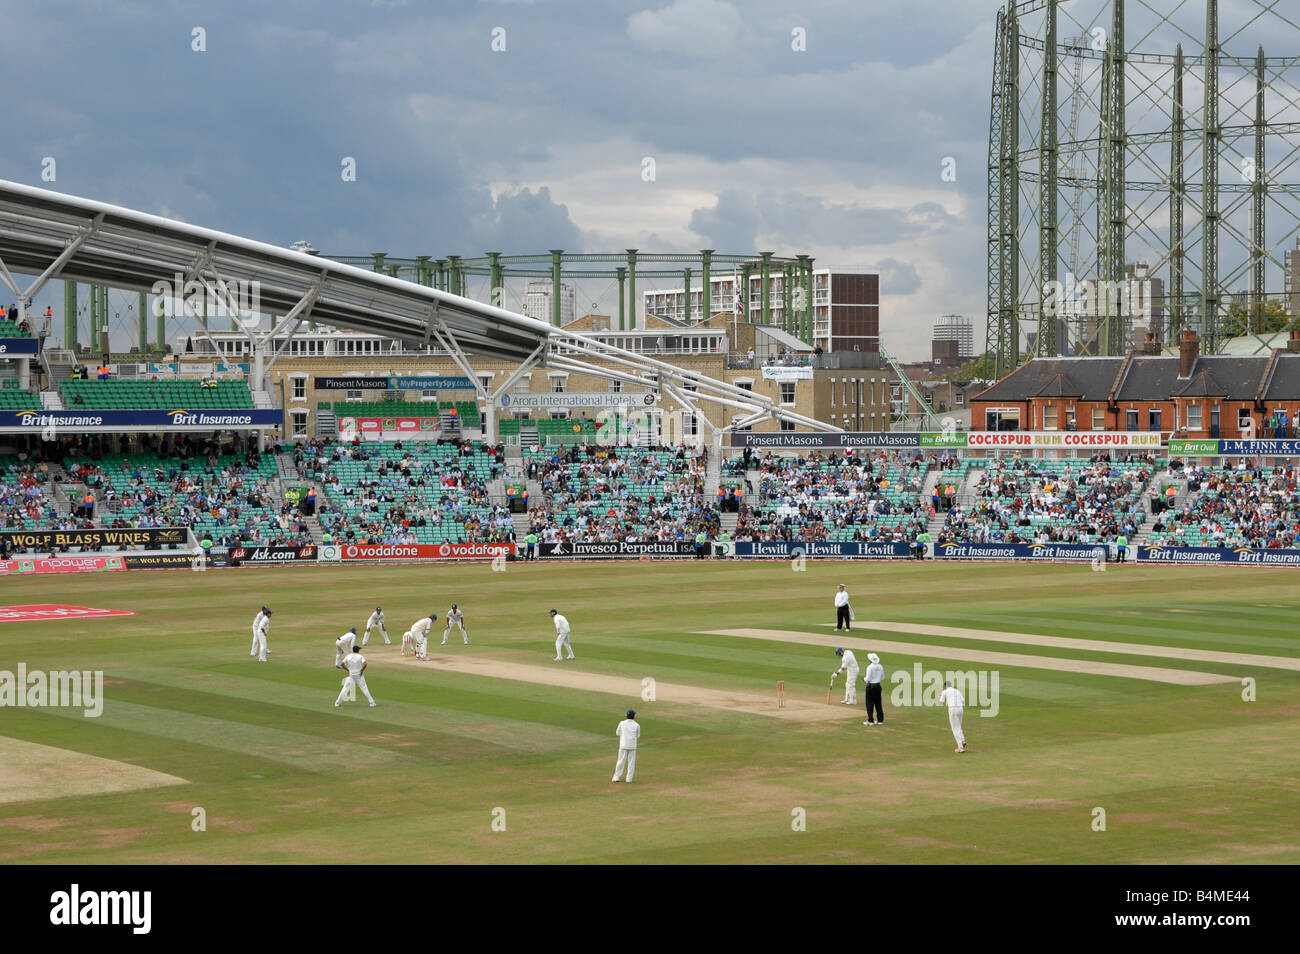 England batting in a Test match against India at the Oval Cricket Ground in 2007 Stock Photo